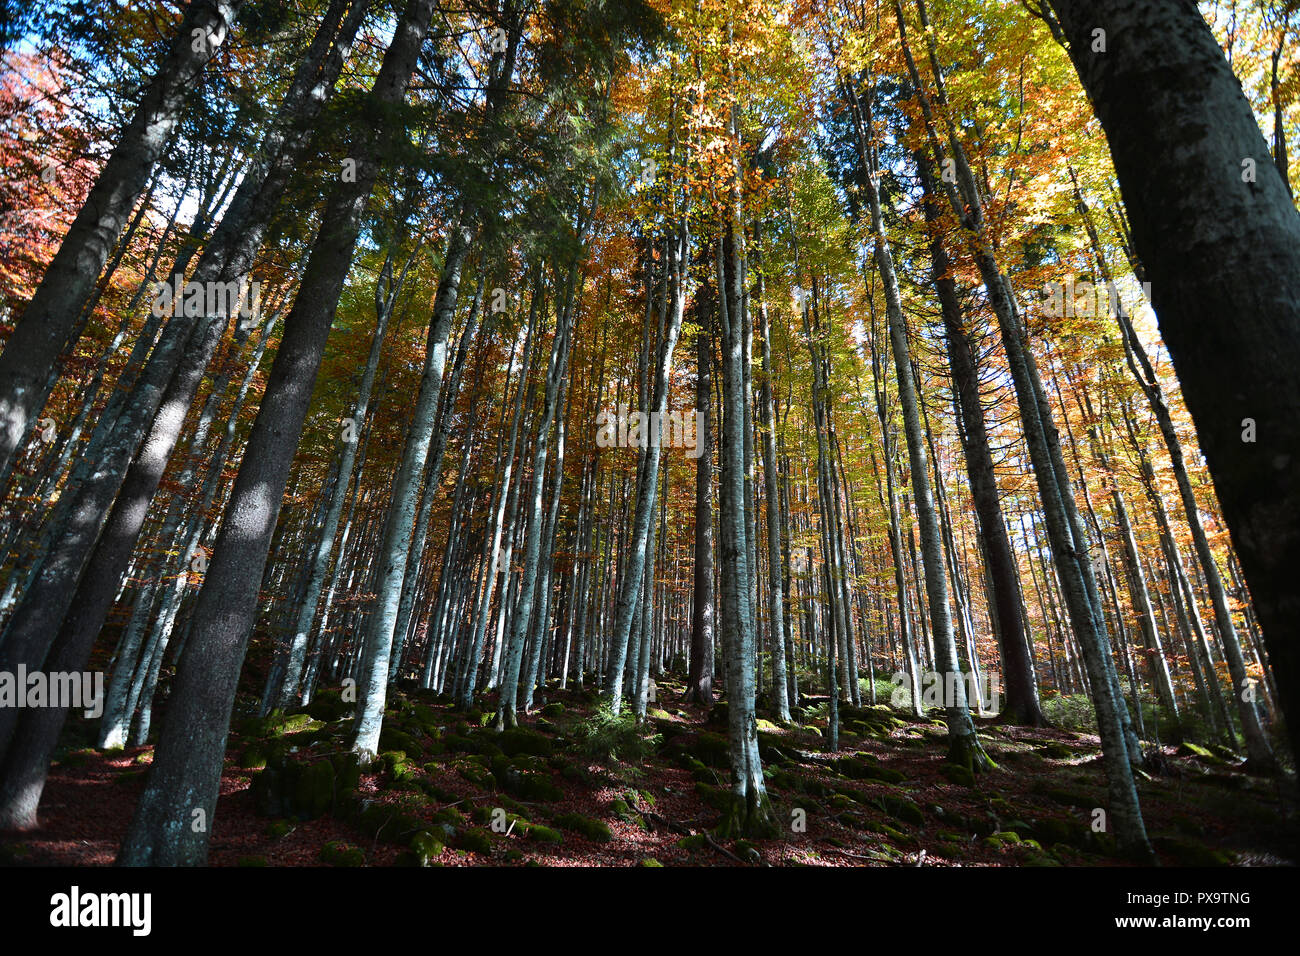 the fantastic colors of the autumn forests Stock Photo